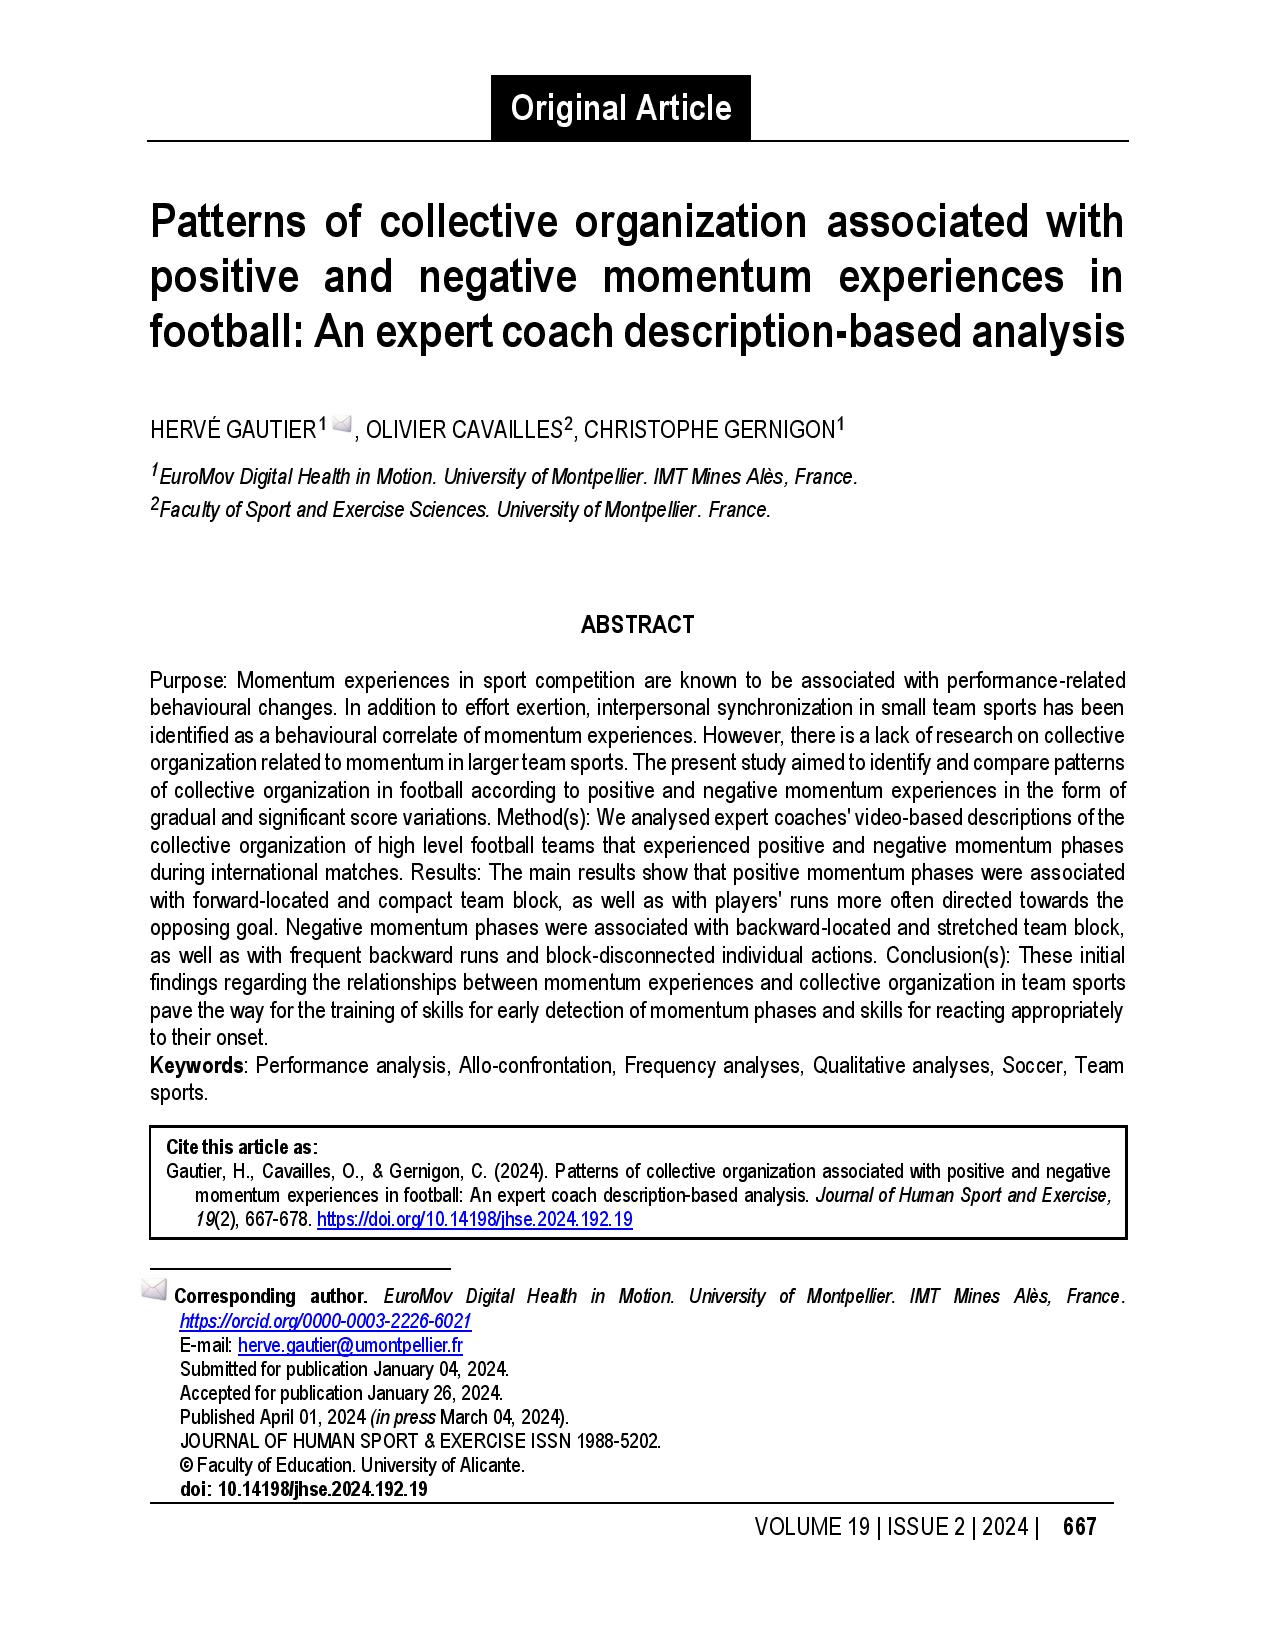 Patterns of collective organization associated with positive and negative momentum experiences in football: An expert coach description-based analysis